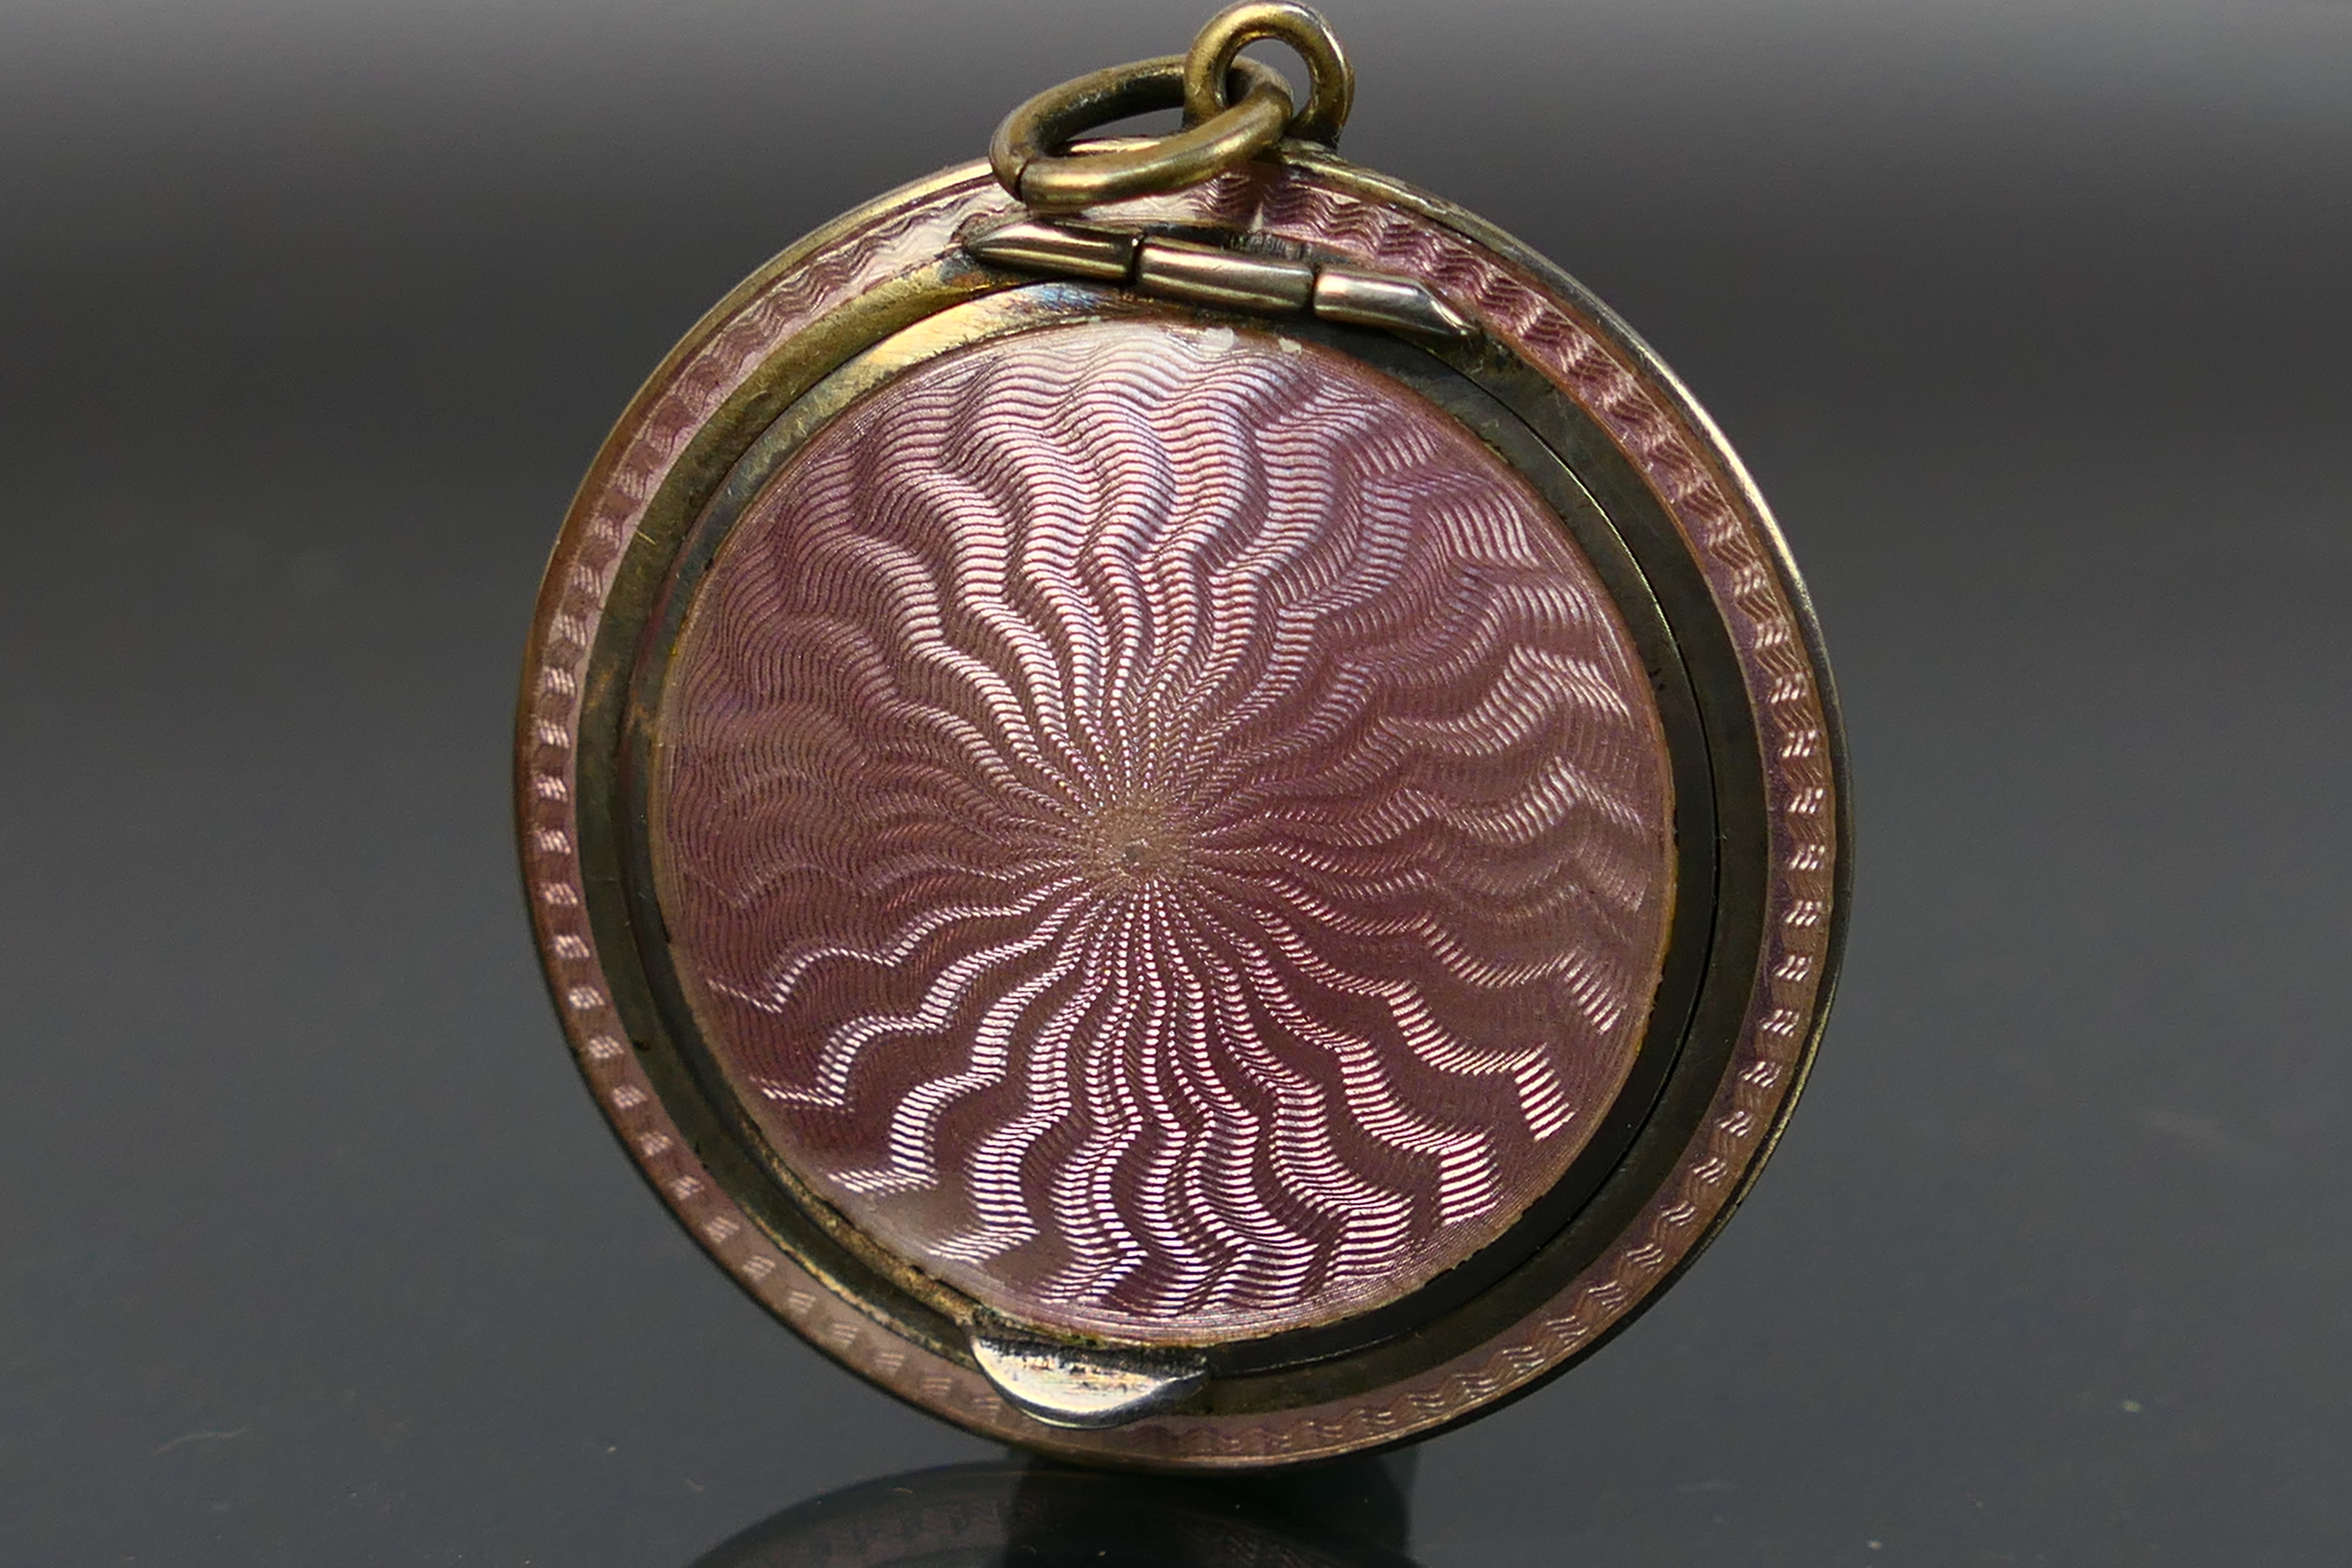 A miniature guilloche enamel powder compact, covered front and back in pale pink enamel. - Image 2 of 6